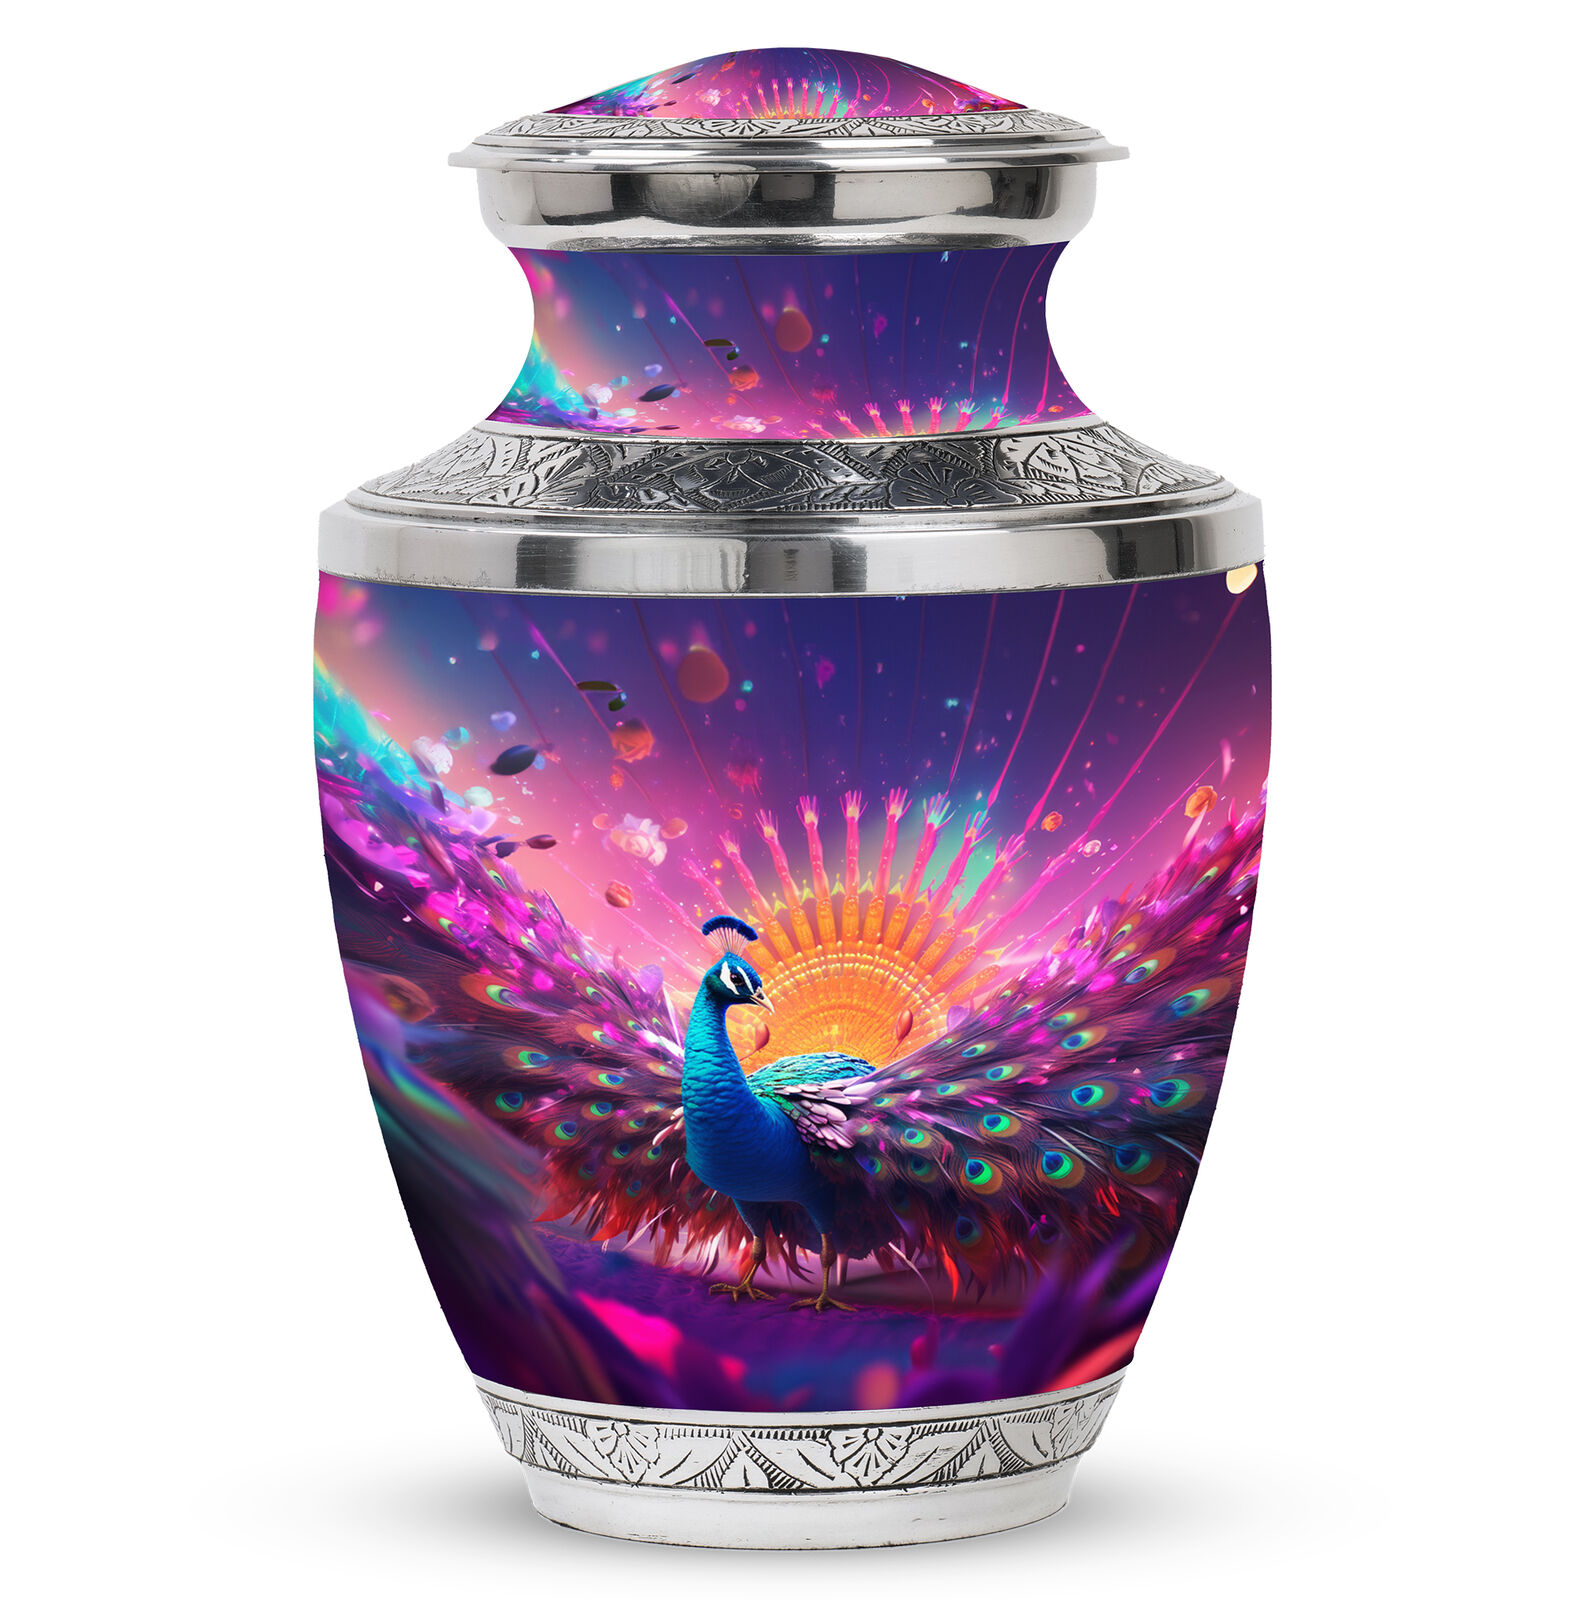 Mini Urns For Human Ashes Keepsake Mythical Peacock (10 Inch) Large Urn